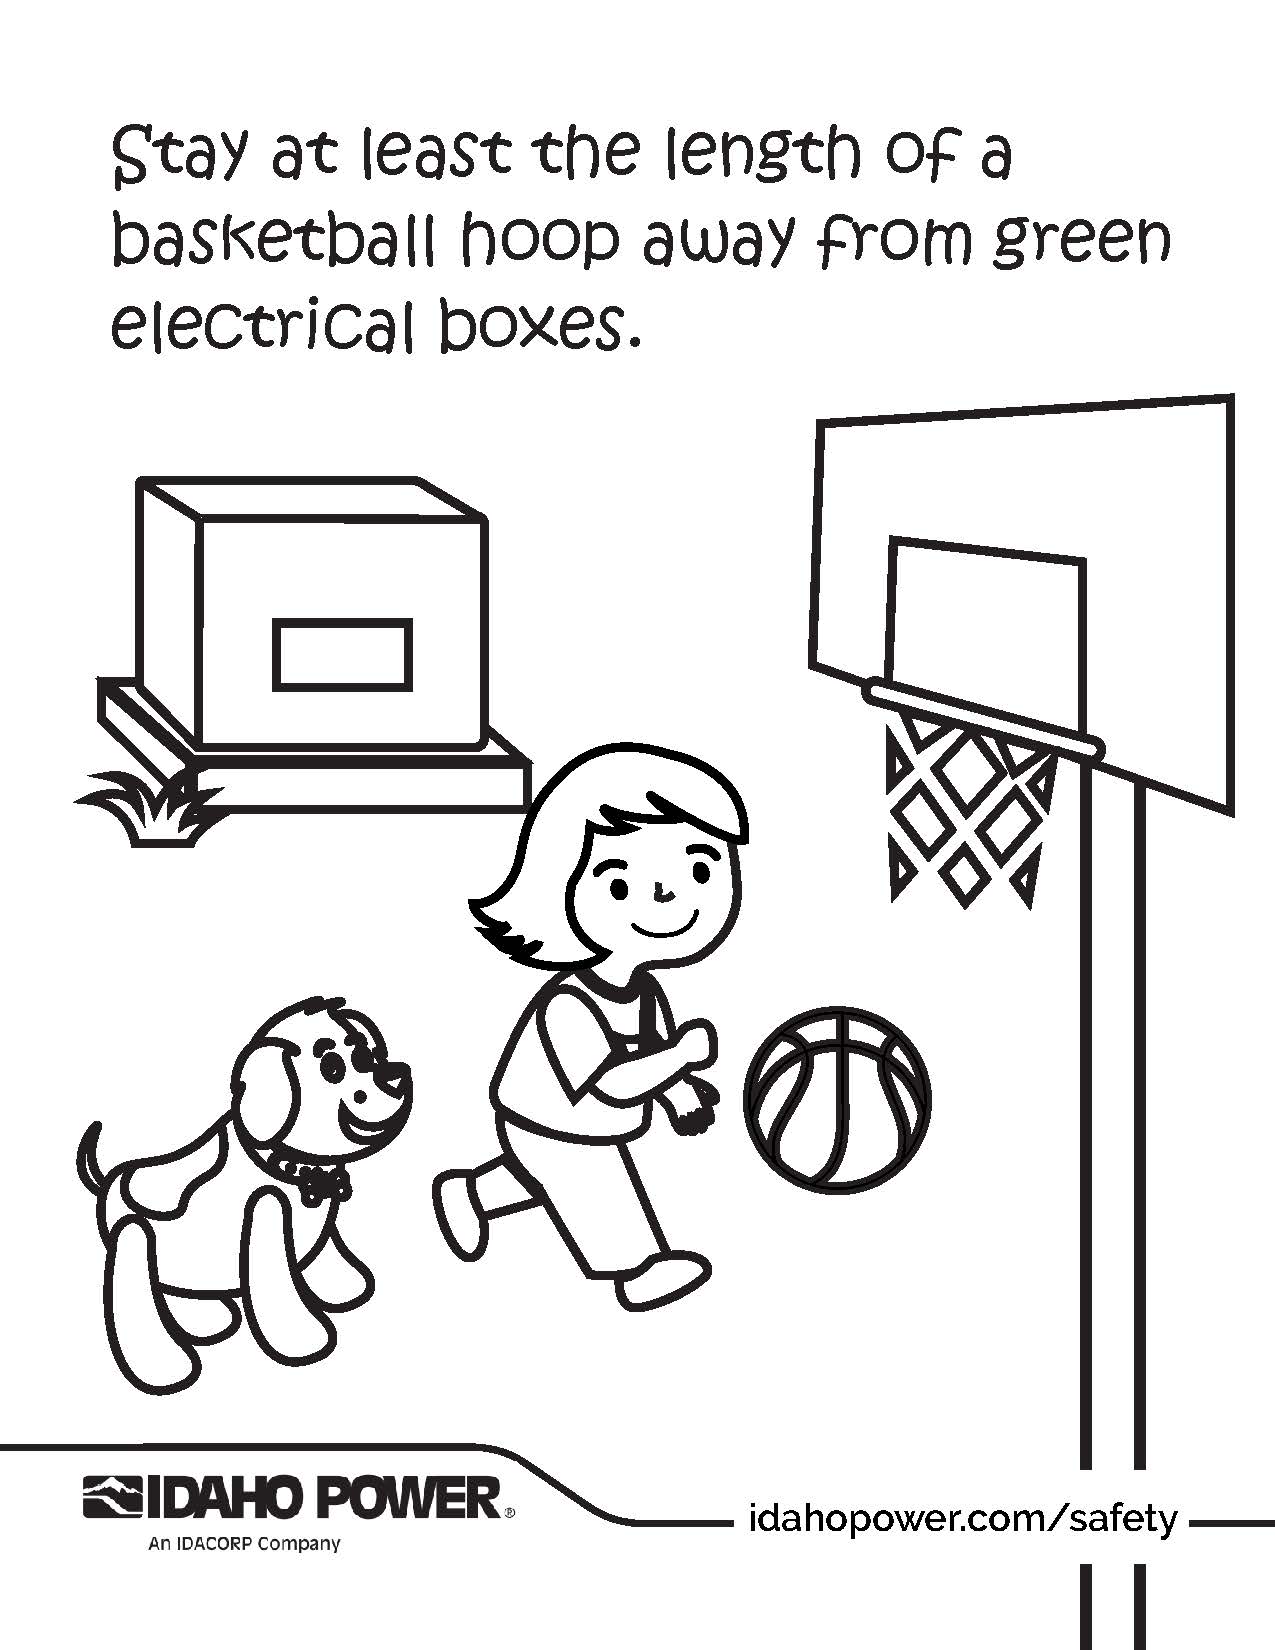 Coloring page of a girl playing basketball that says, Stay at least the length of a basketball hoop away from green electrical boxes